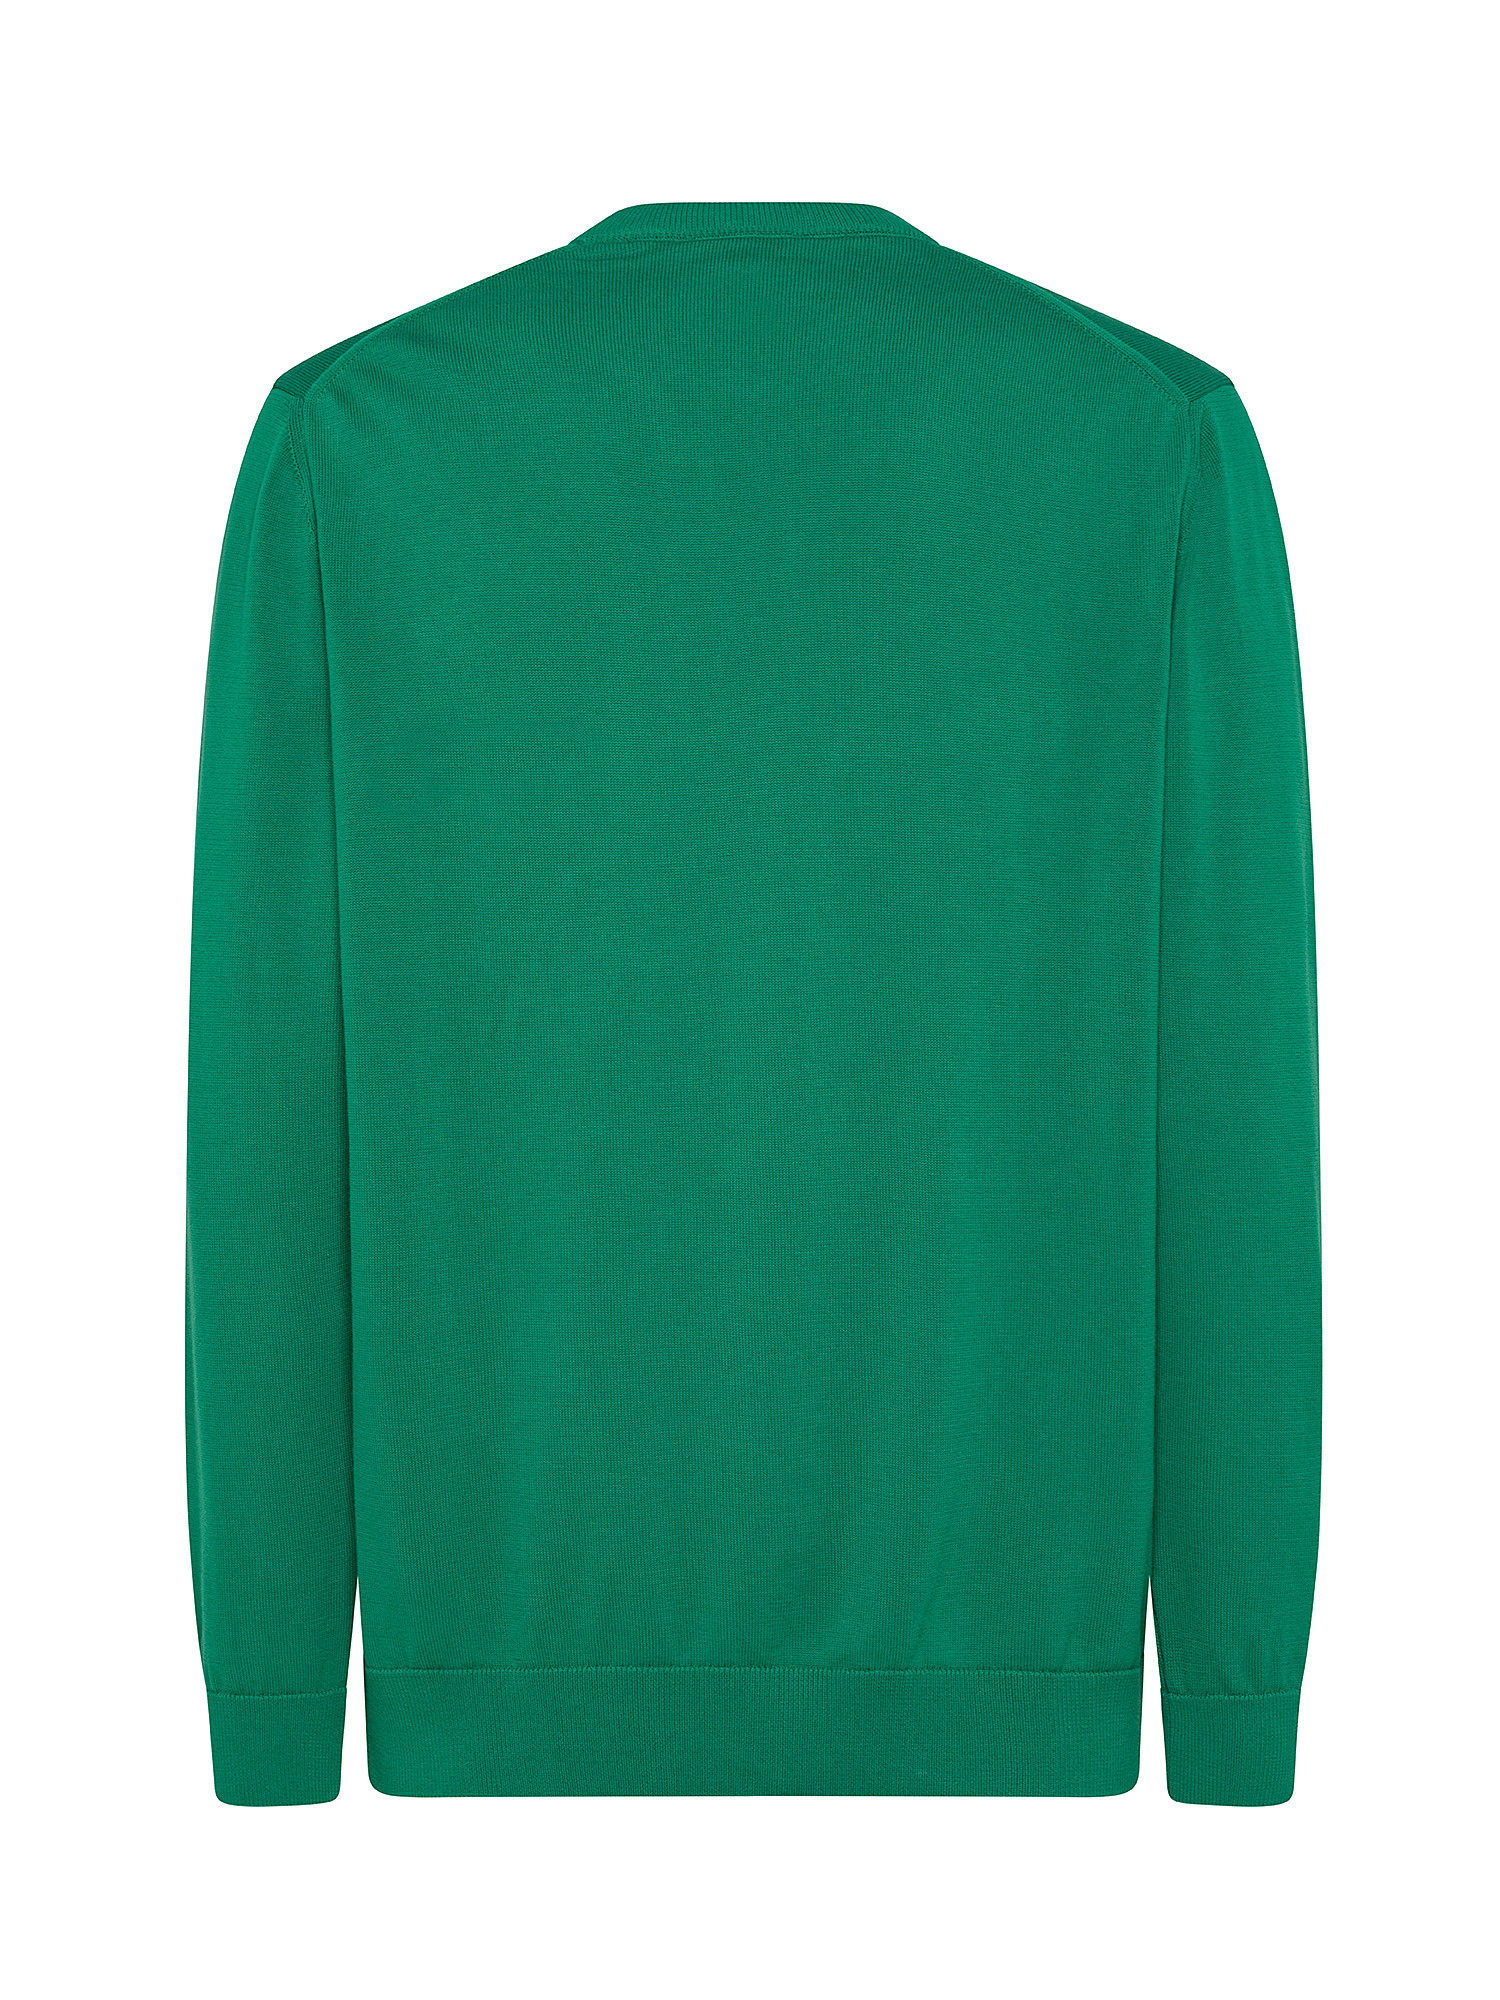 Pullover, Green, large image number 1